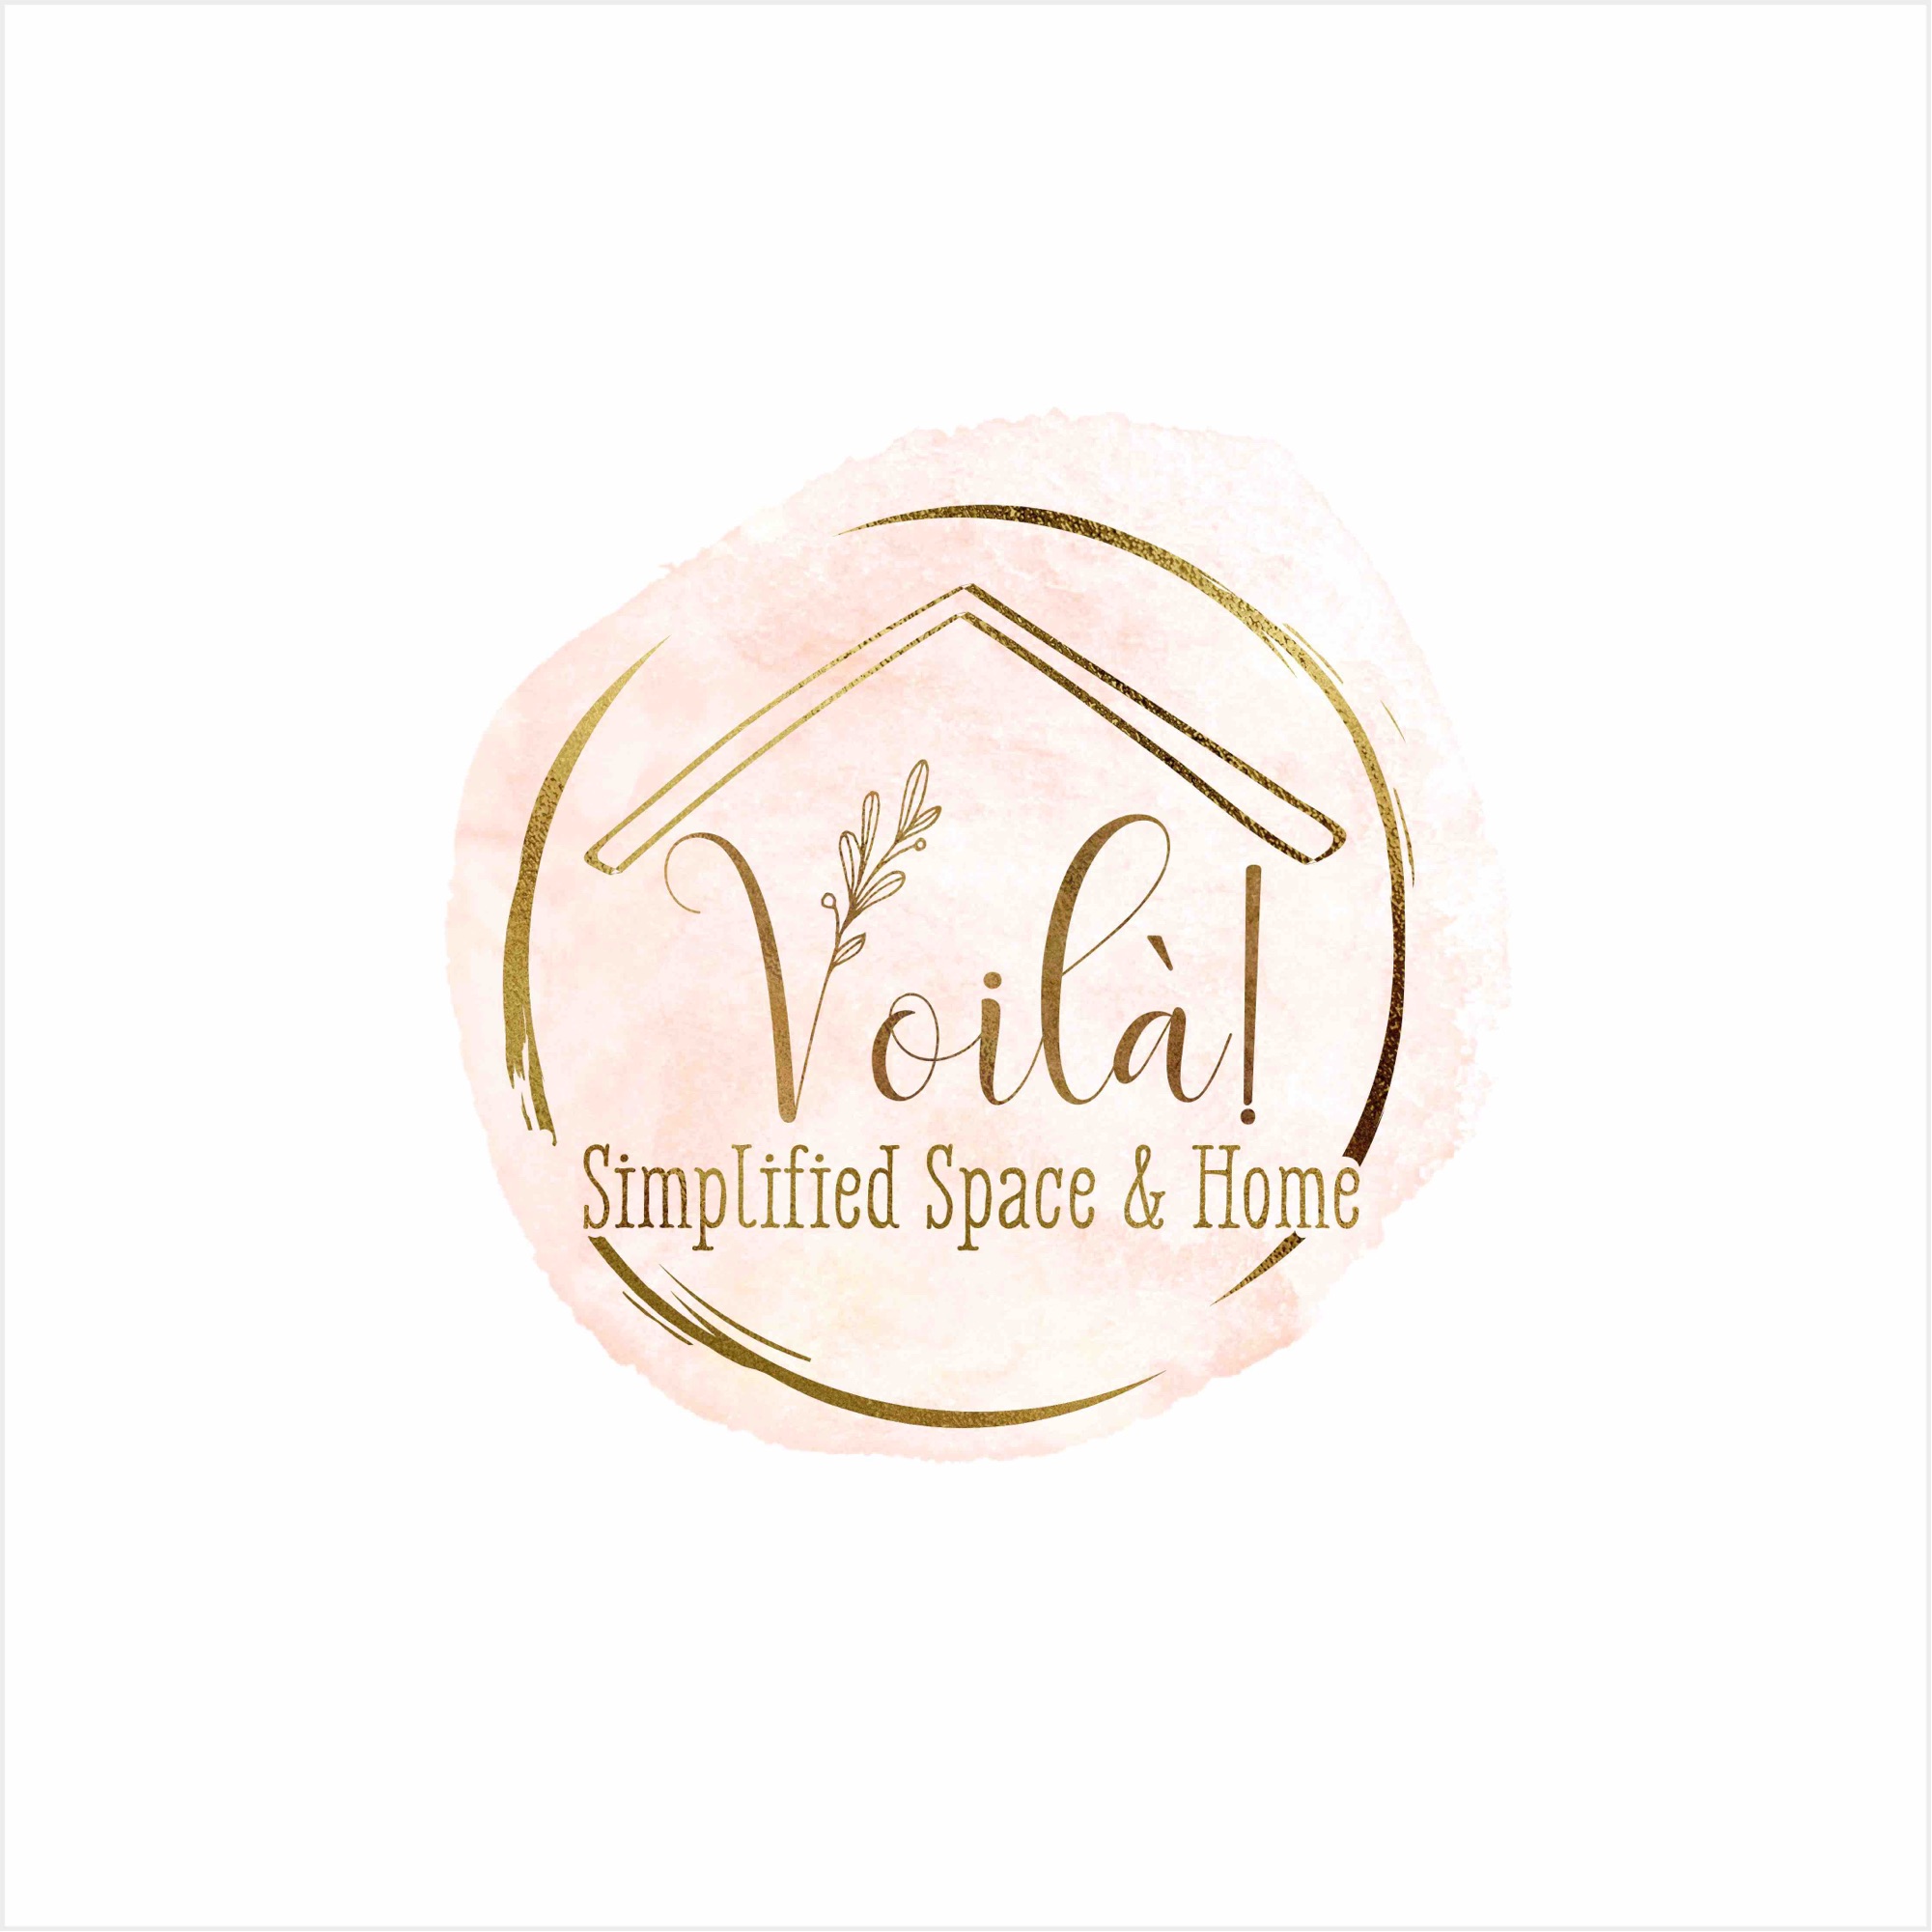 Voila! Simplified Space & Home Logo